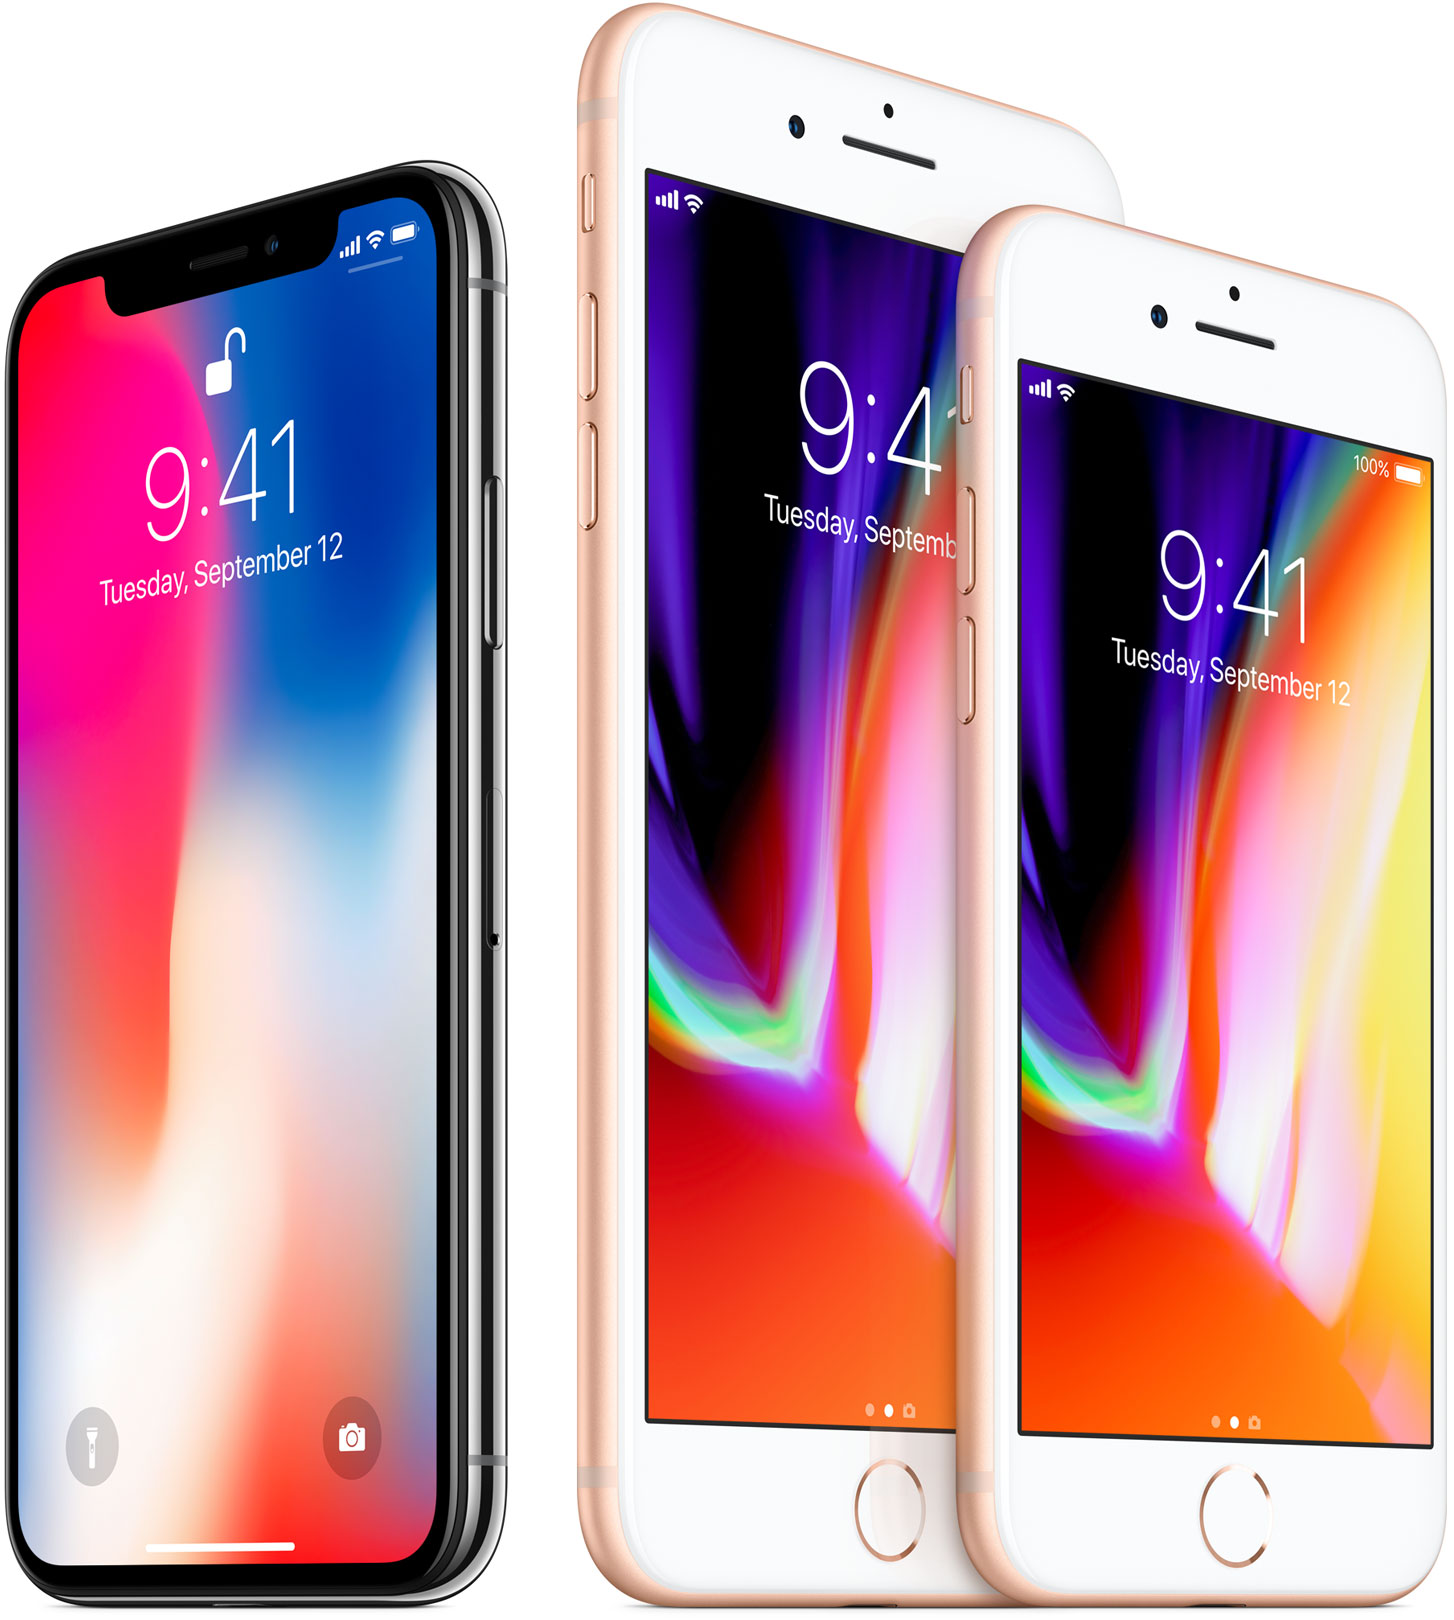 Sketchy Report Has It That Apple May Slash Iphone Prices Come Early 2018